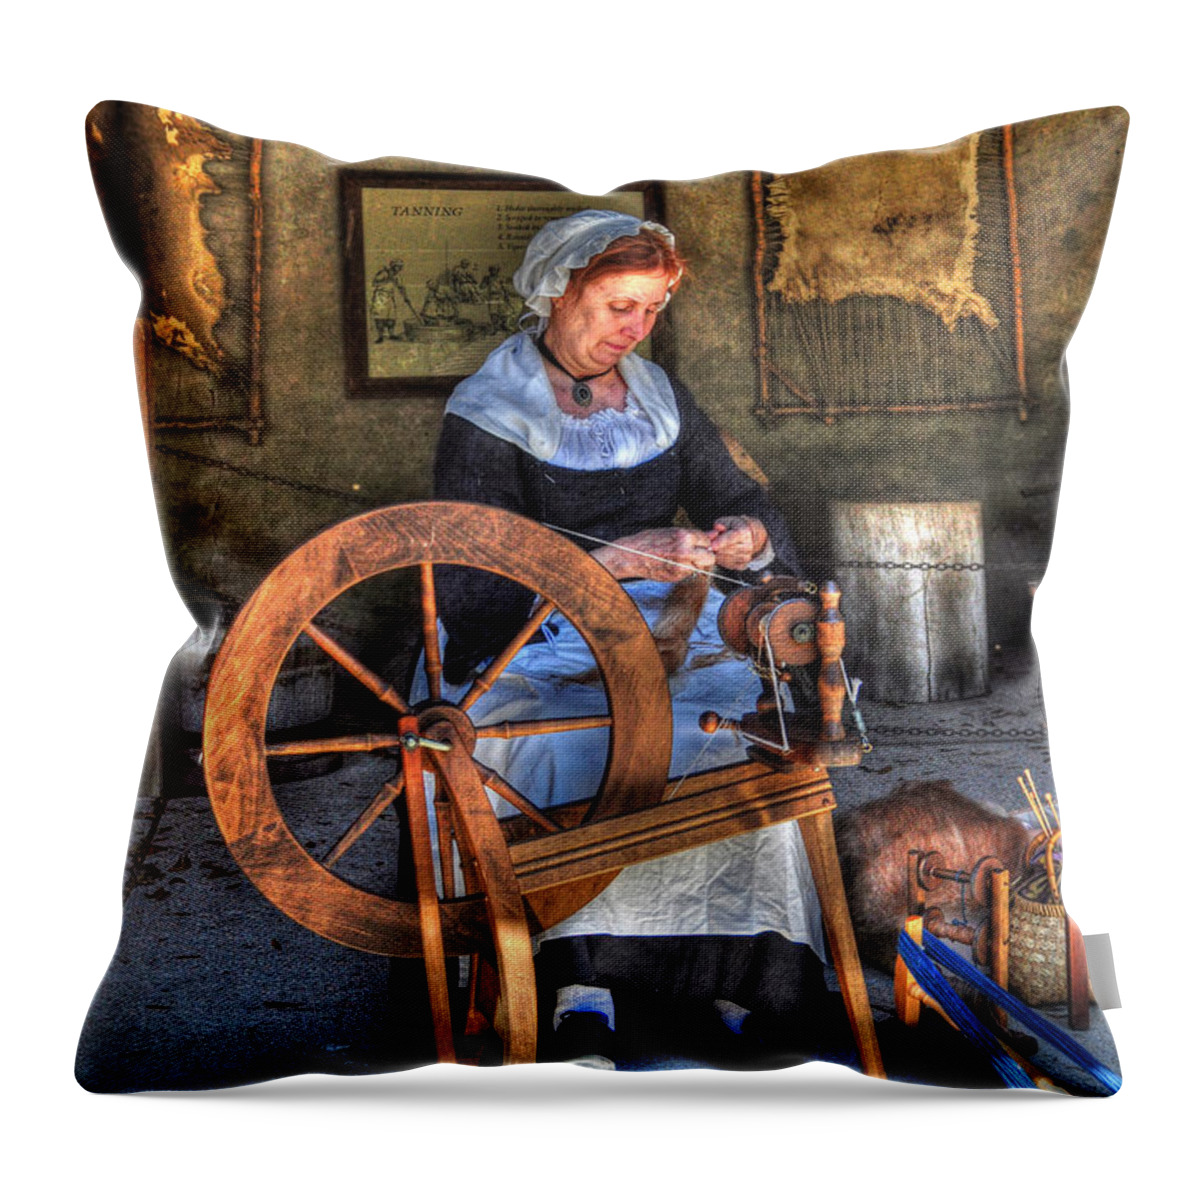 Historic Throw Pillow featuring the photograph Spinning Yarn by Kathy Baccari